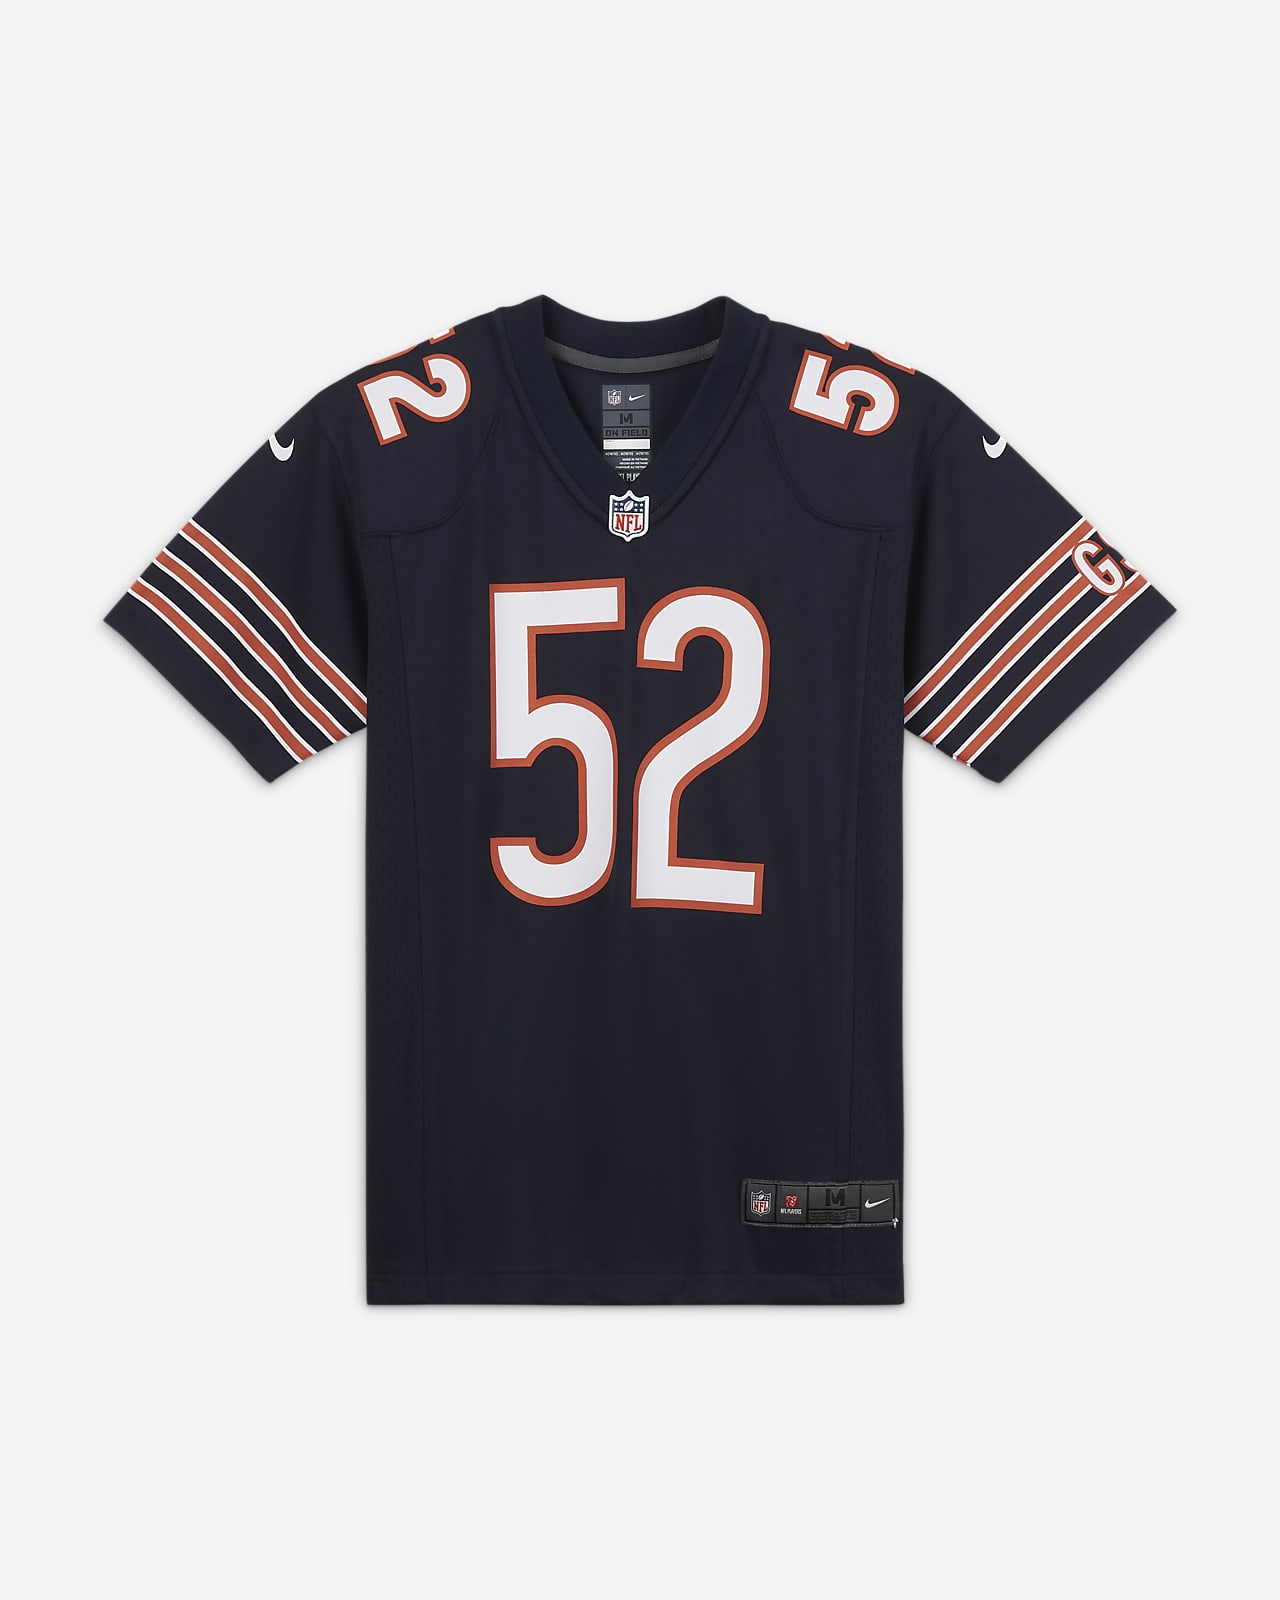 https://static.nike.com/a/images/t_PDP_1280_v1/f_auto,q_auto:eco/8e558bce-5620-46d3-9c78-0fb76e0ebf3c/chicago-bears-older-game-american-football-jersey-MmFwVK.png